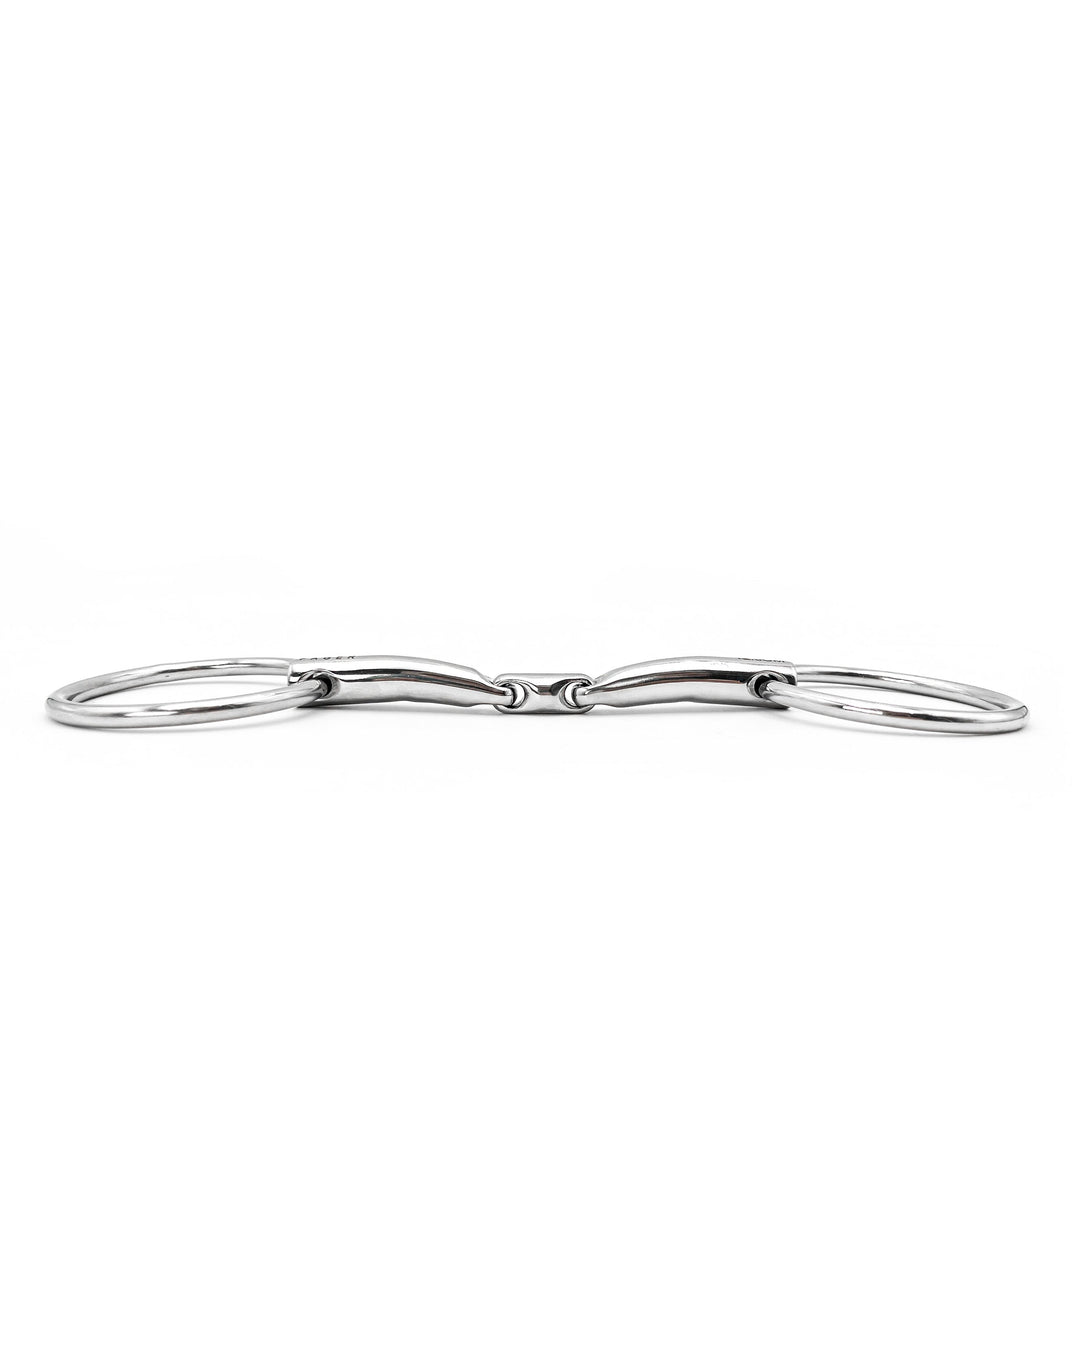 Fager Rune Stainless Steel Loose Ring